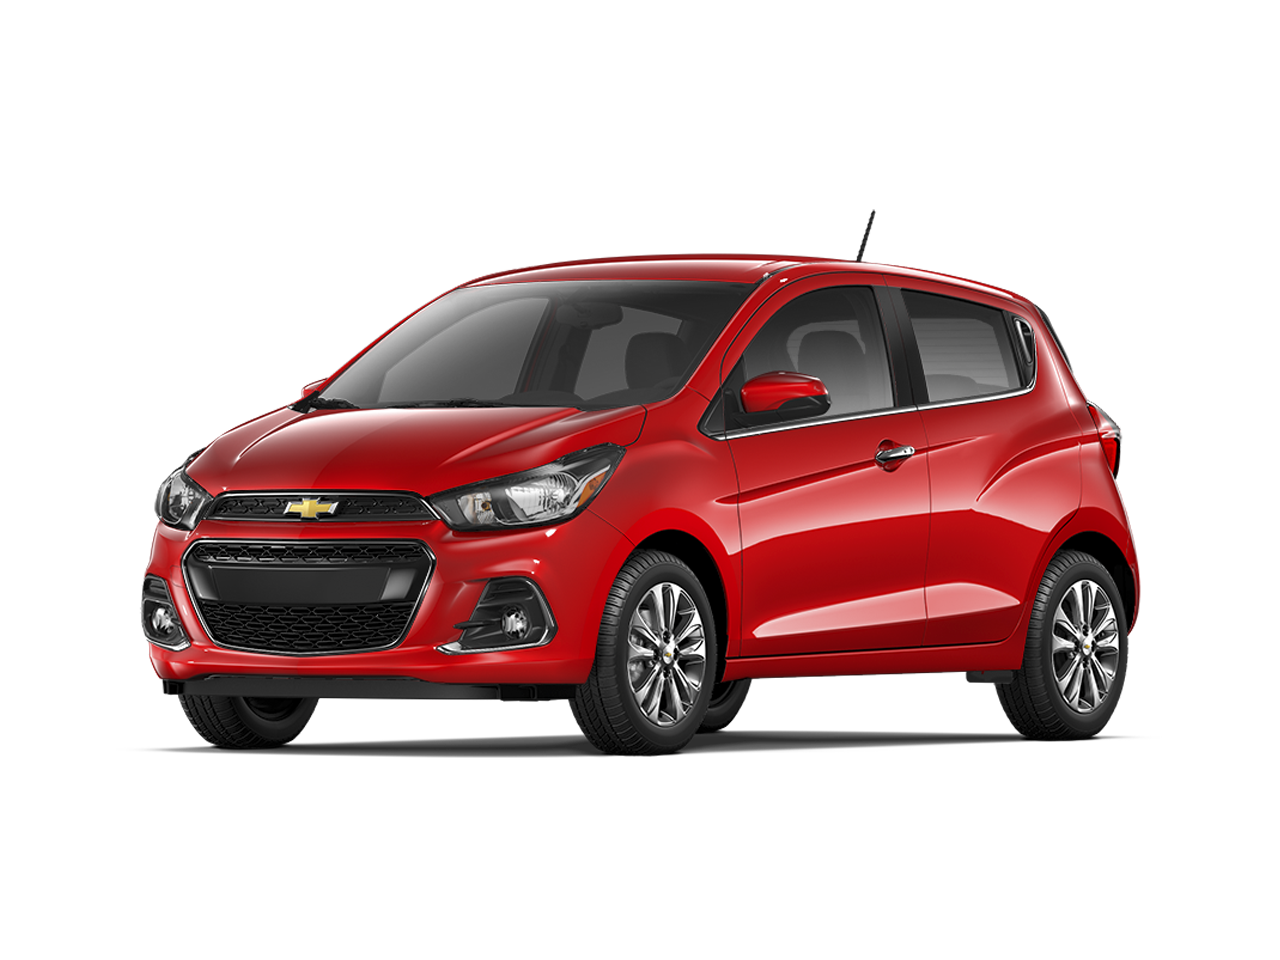 New 2018 Chevrolet Spark For Sale | New & Used Chevy Spark For Sale Del Rio